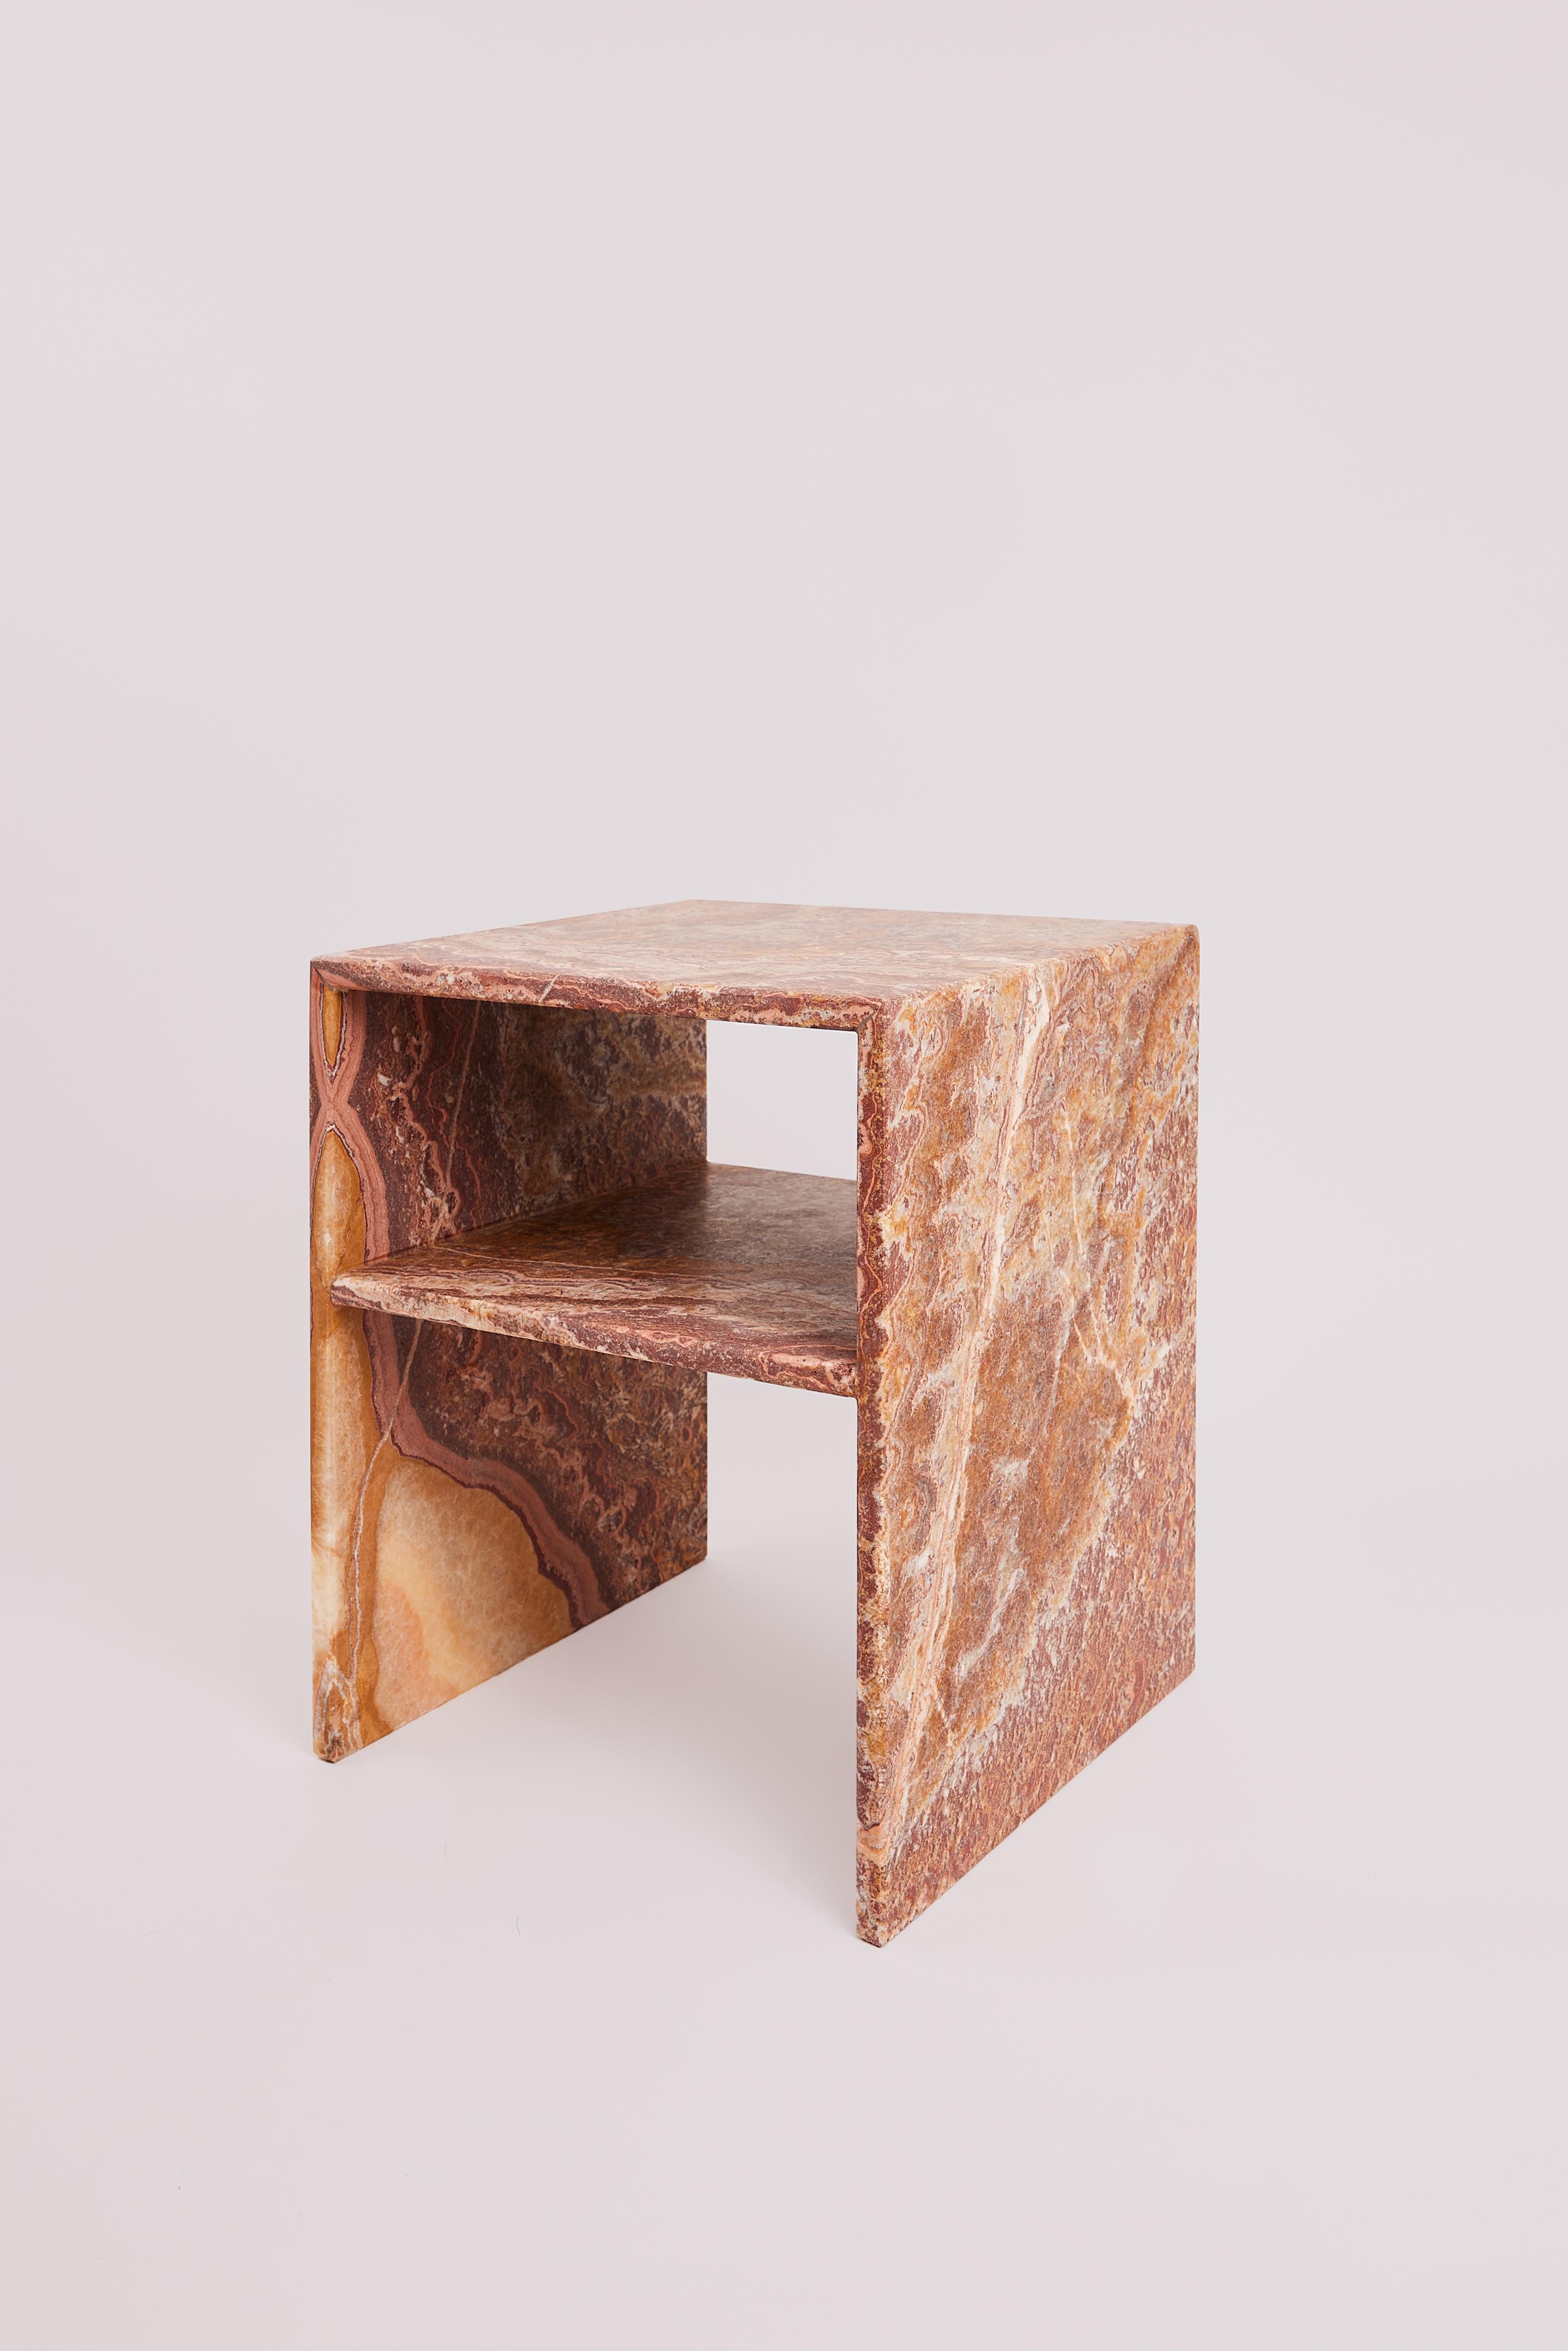 Red Onyx Rosa Bedside Table by Studio Gaia Paris
Dimensions: W 40 x D 40 x H 50 cm
Materials: Red Onyx

The Rosa table is a bedside table, a side table or an end table.

It is made from exotic onyx known for its beauty and color variations.
Each